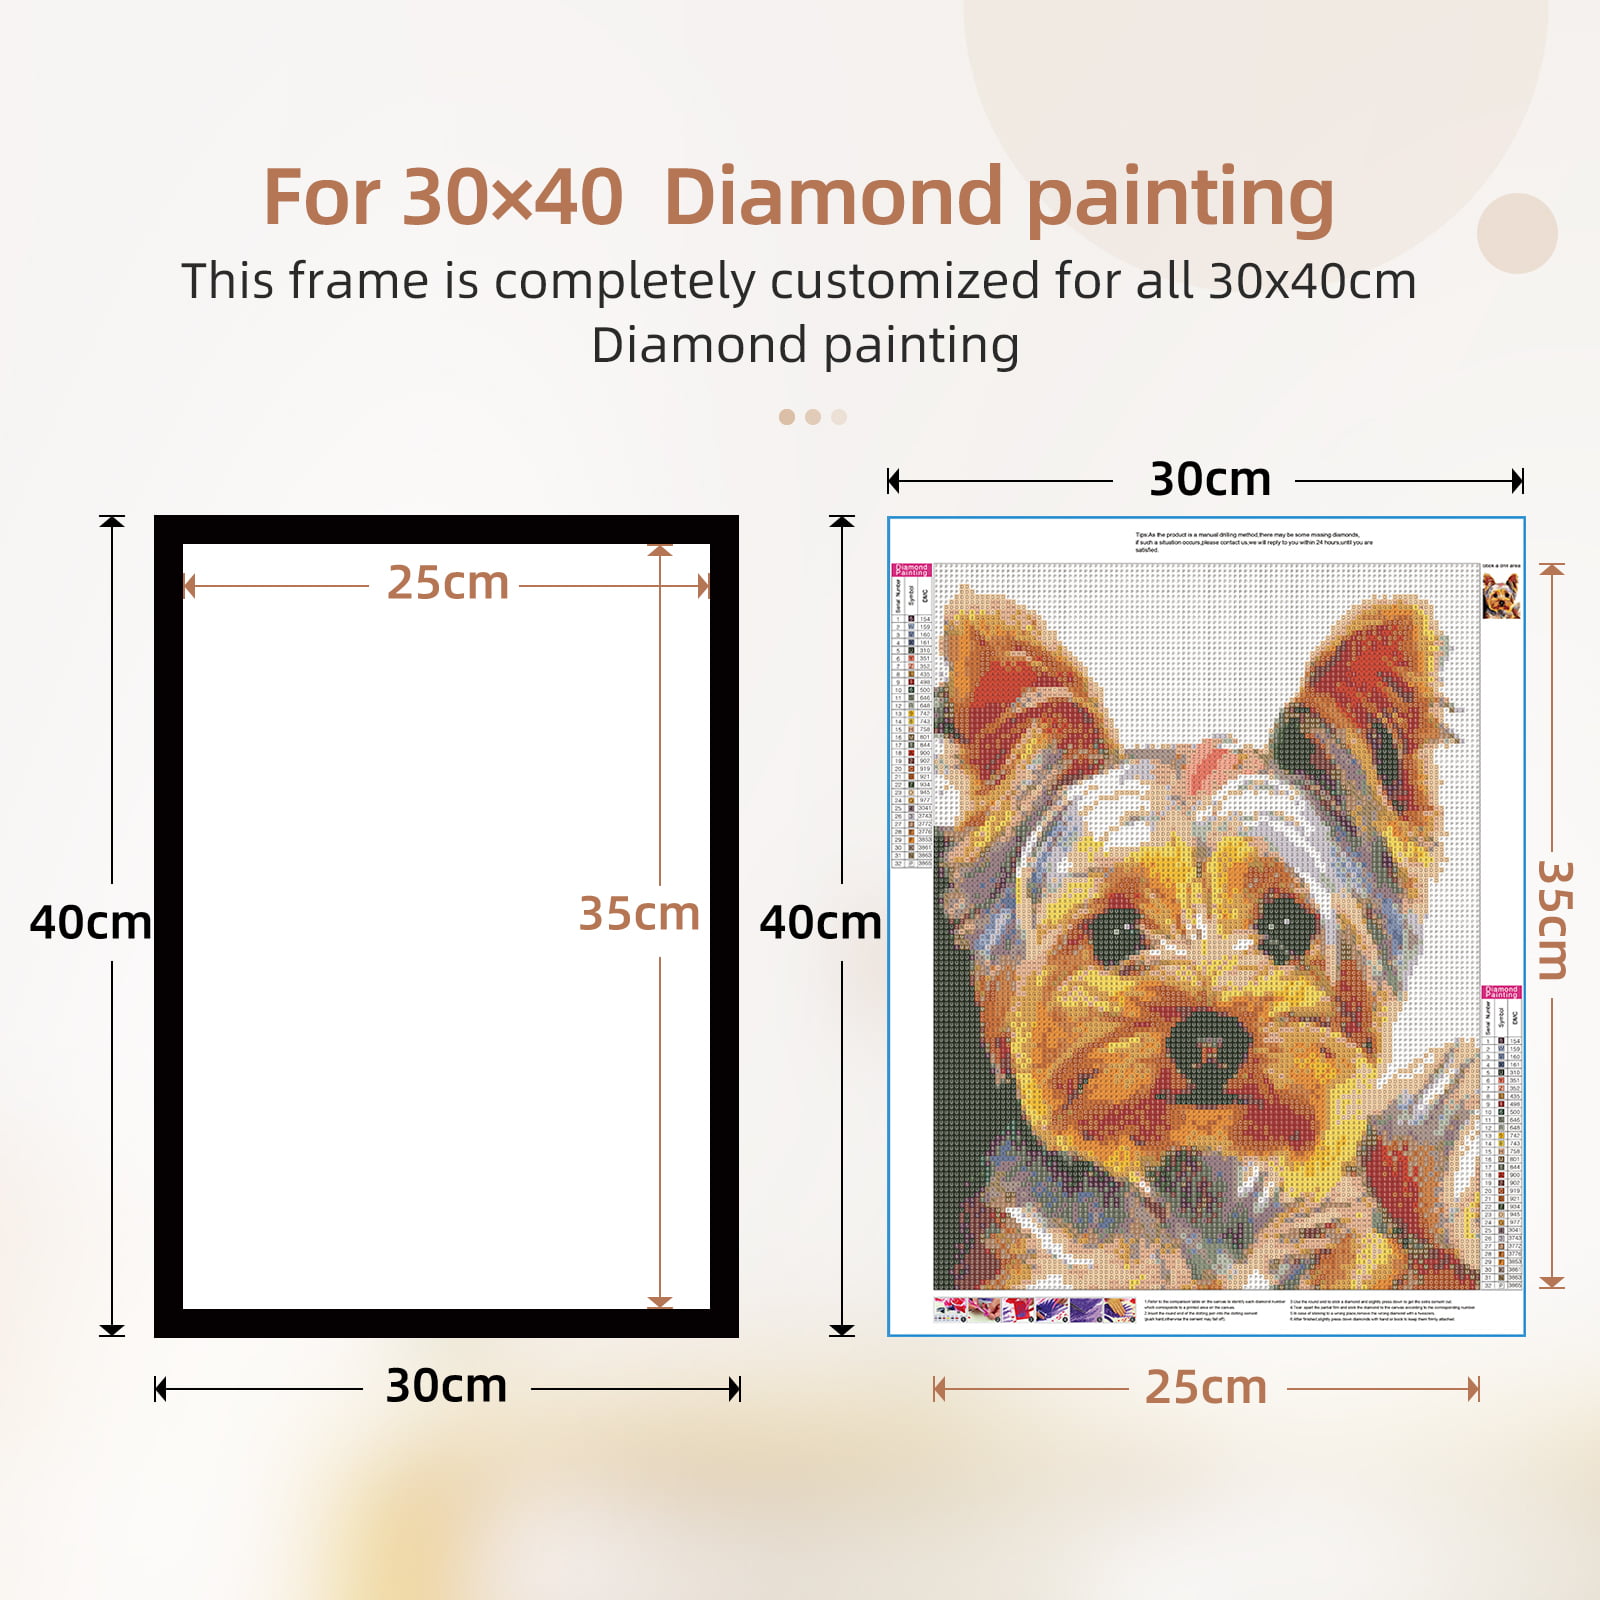 QCQHDU 3 Pack Diamond Painting Frames, Frames for 2*30x40cm and